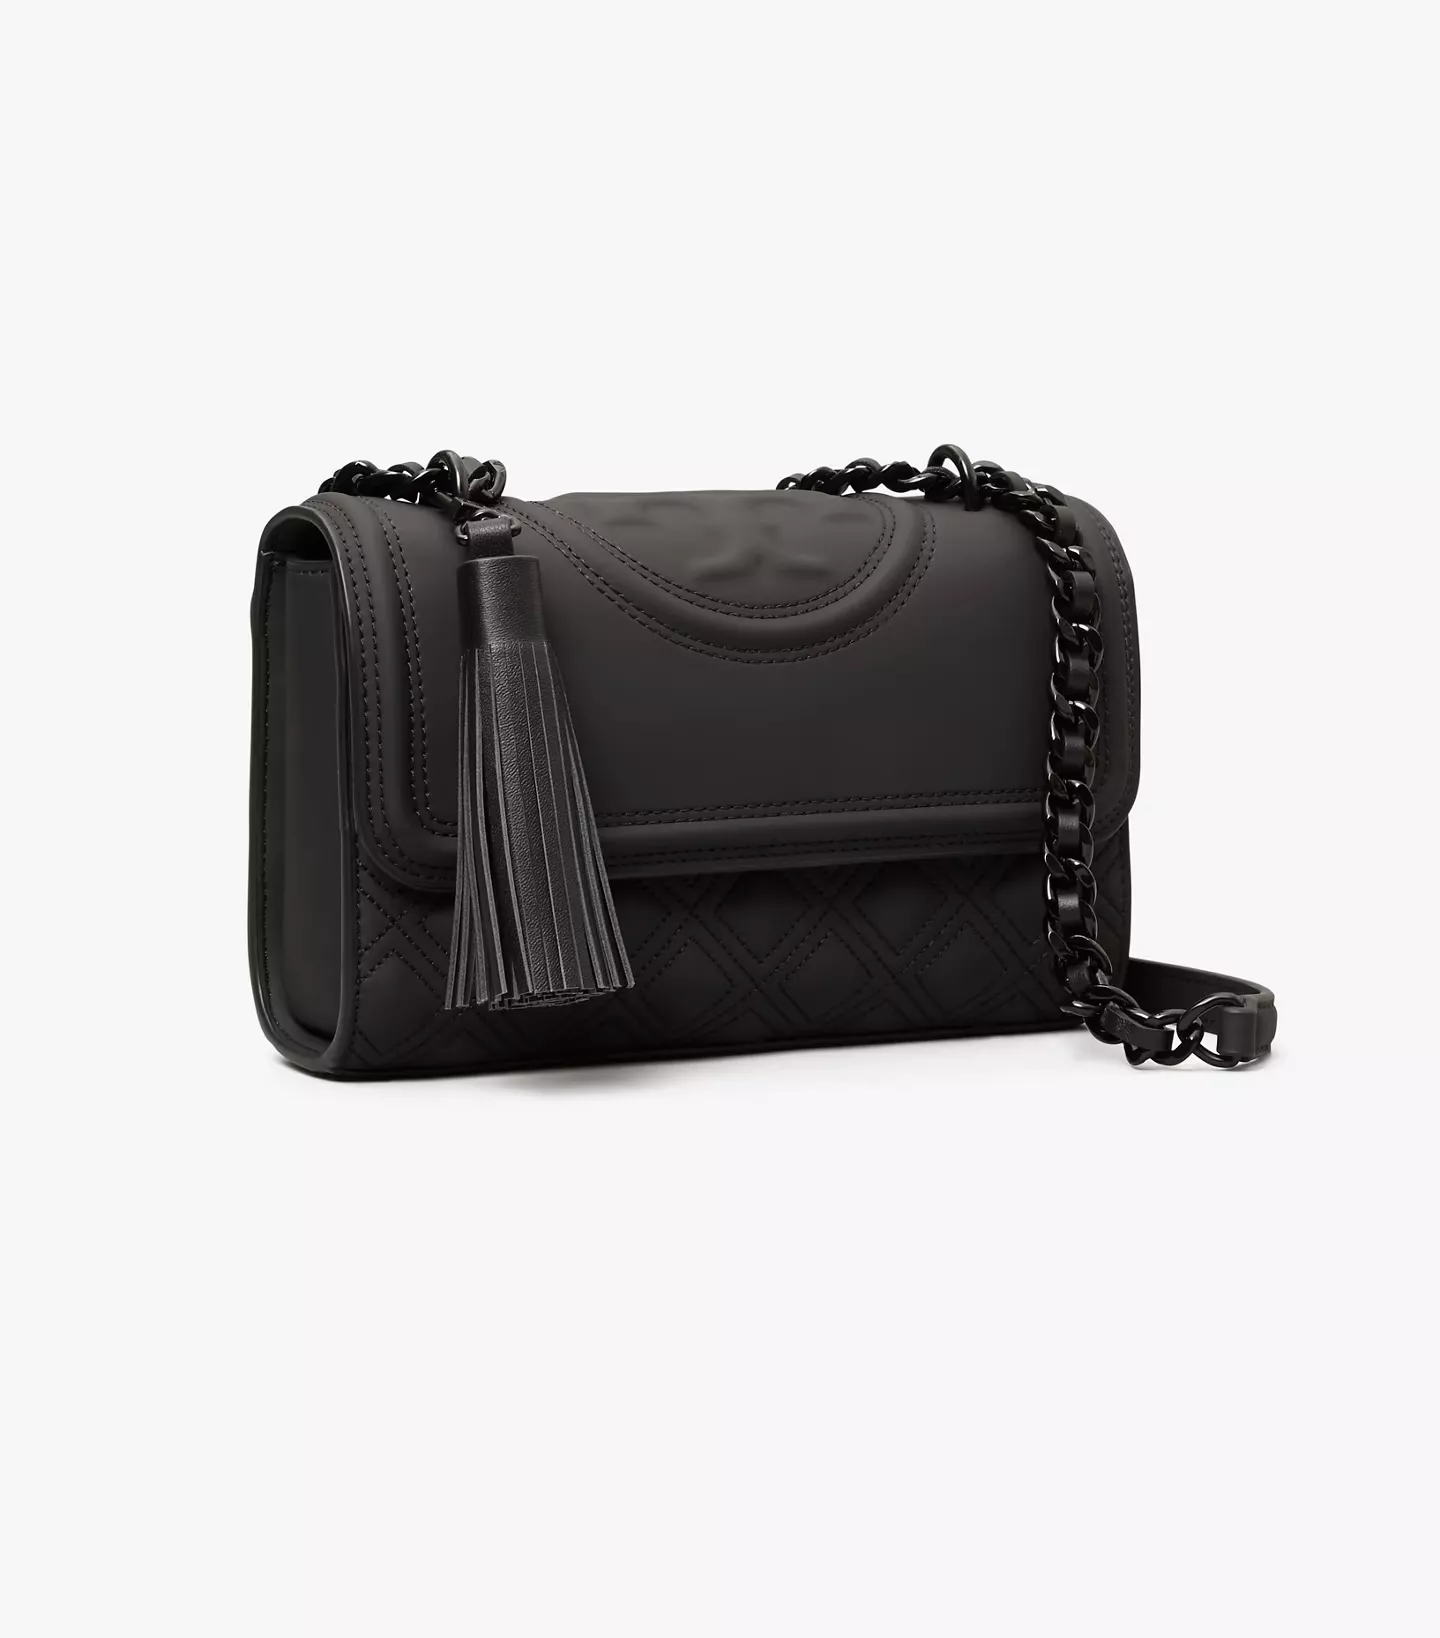 Tory Burch Matte Black Fleming. Trash or Pass??/ What's in my bag